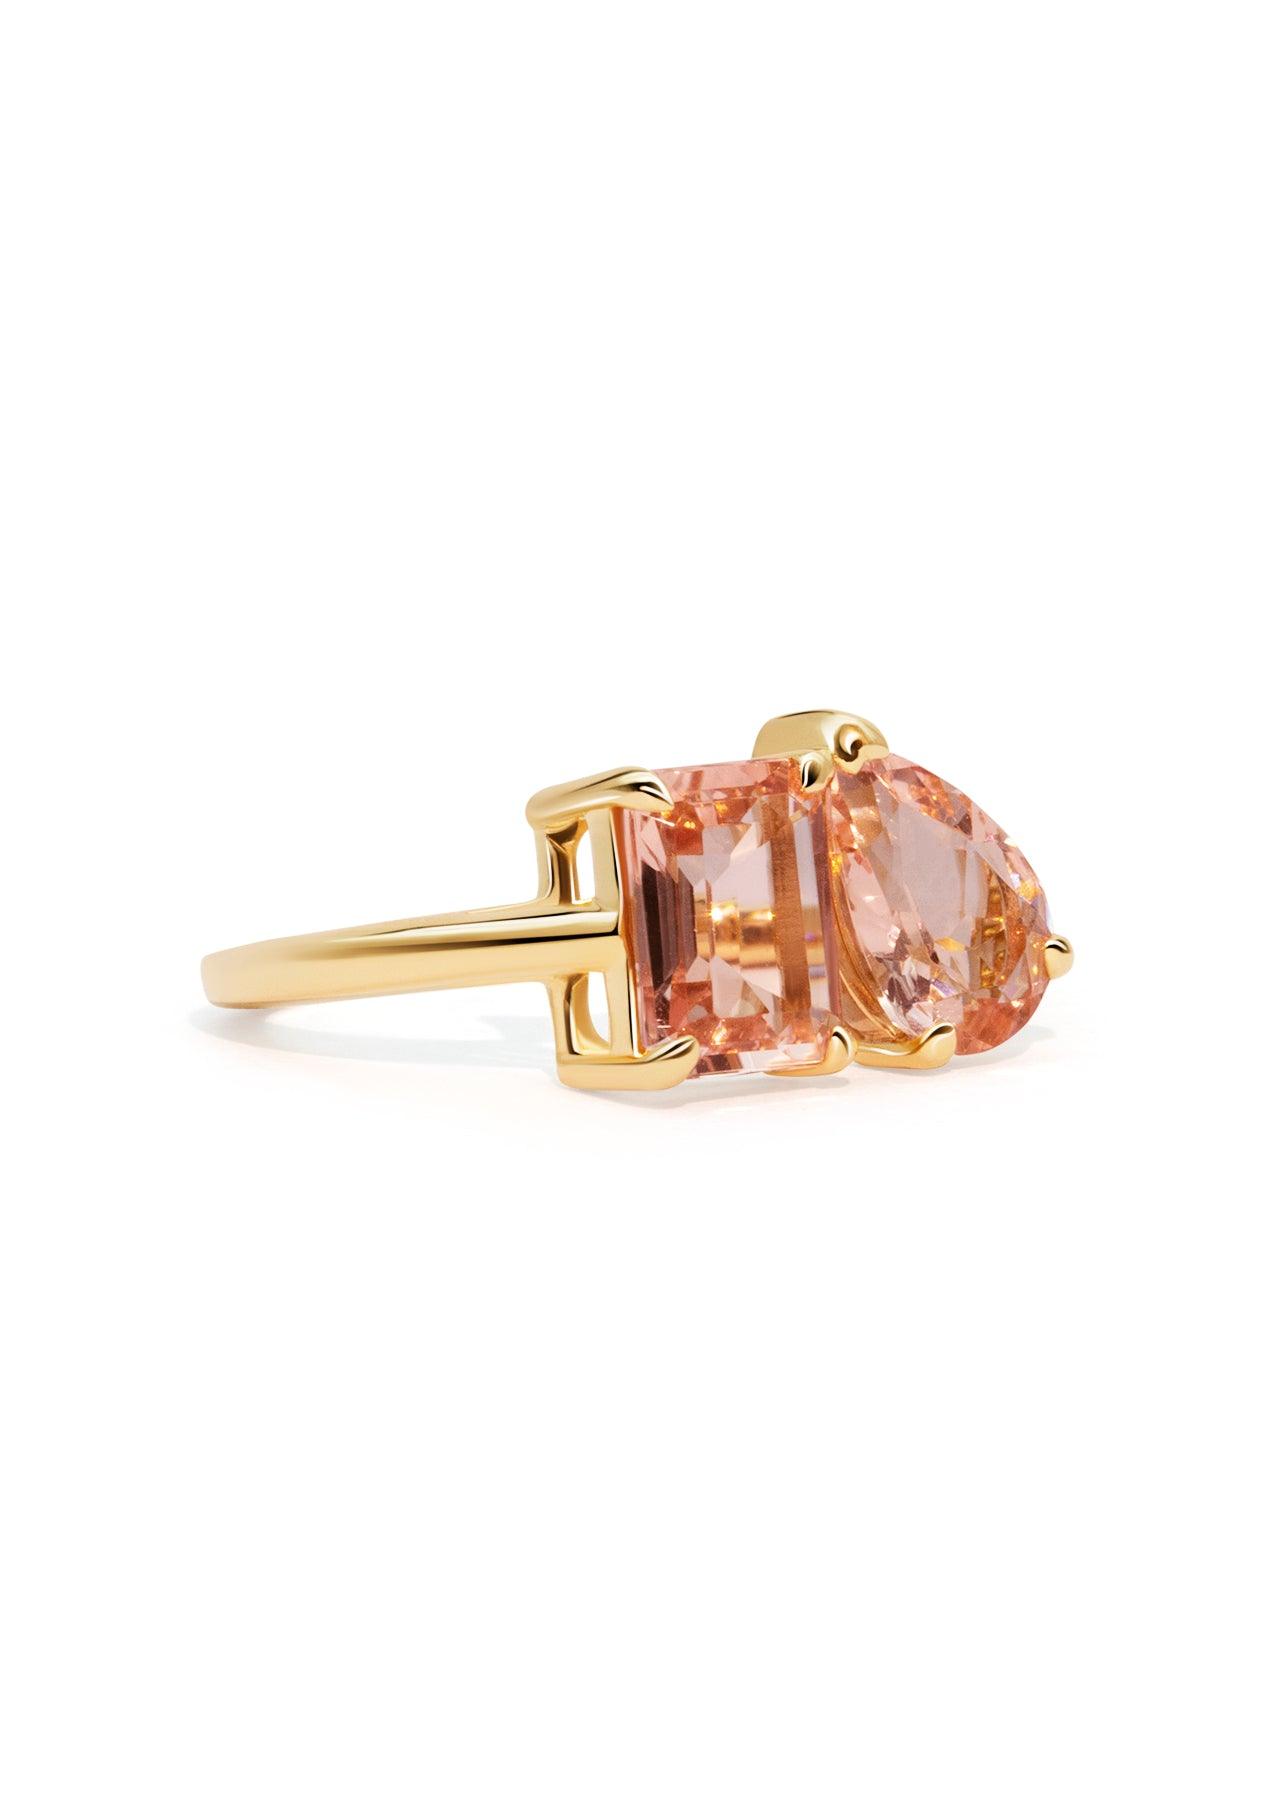 The Toi Et Moi 1.27ct and 1.01ct Morganite Ring - Molten Store